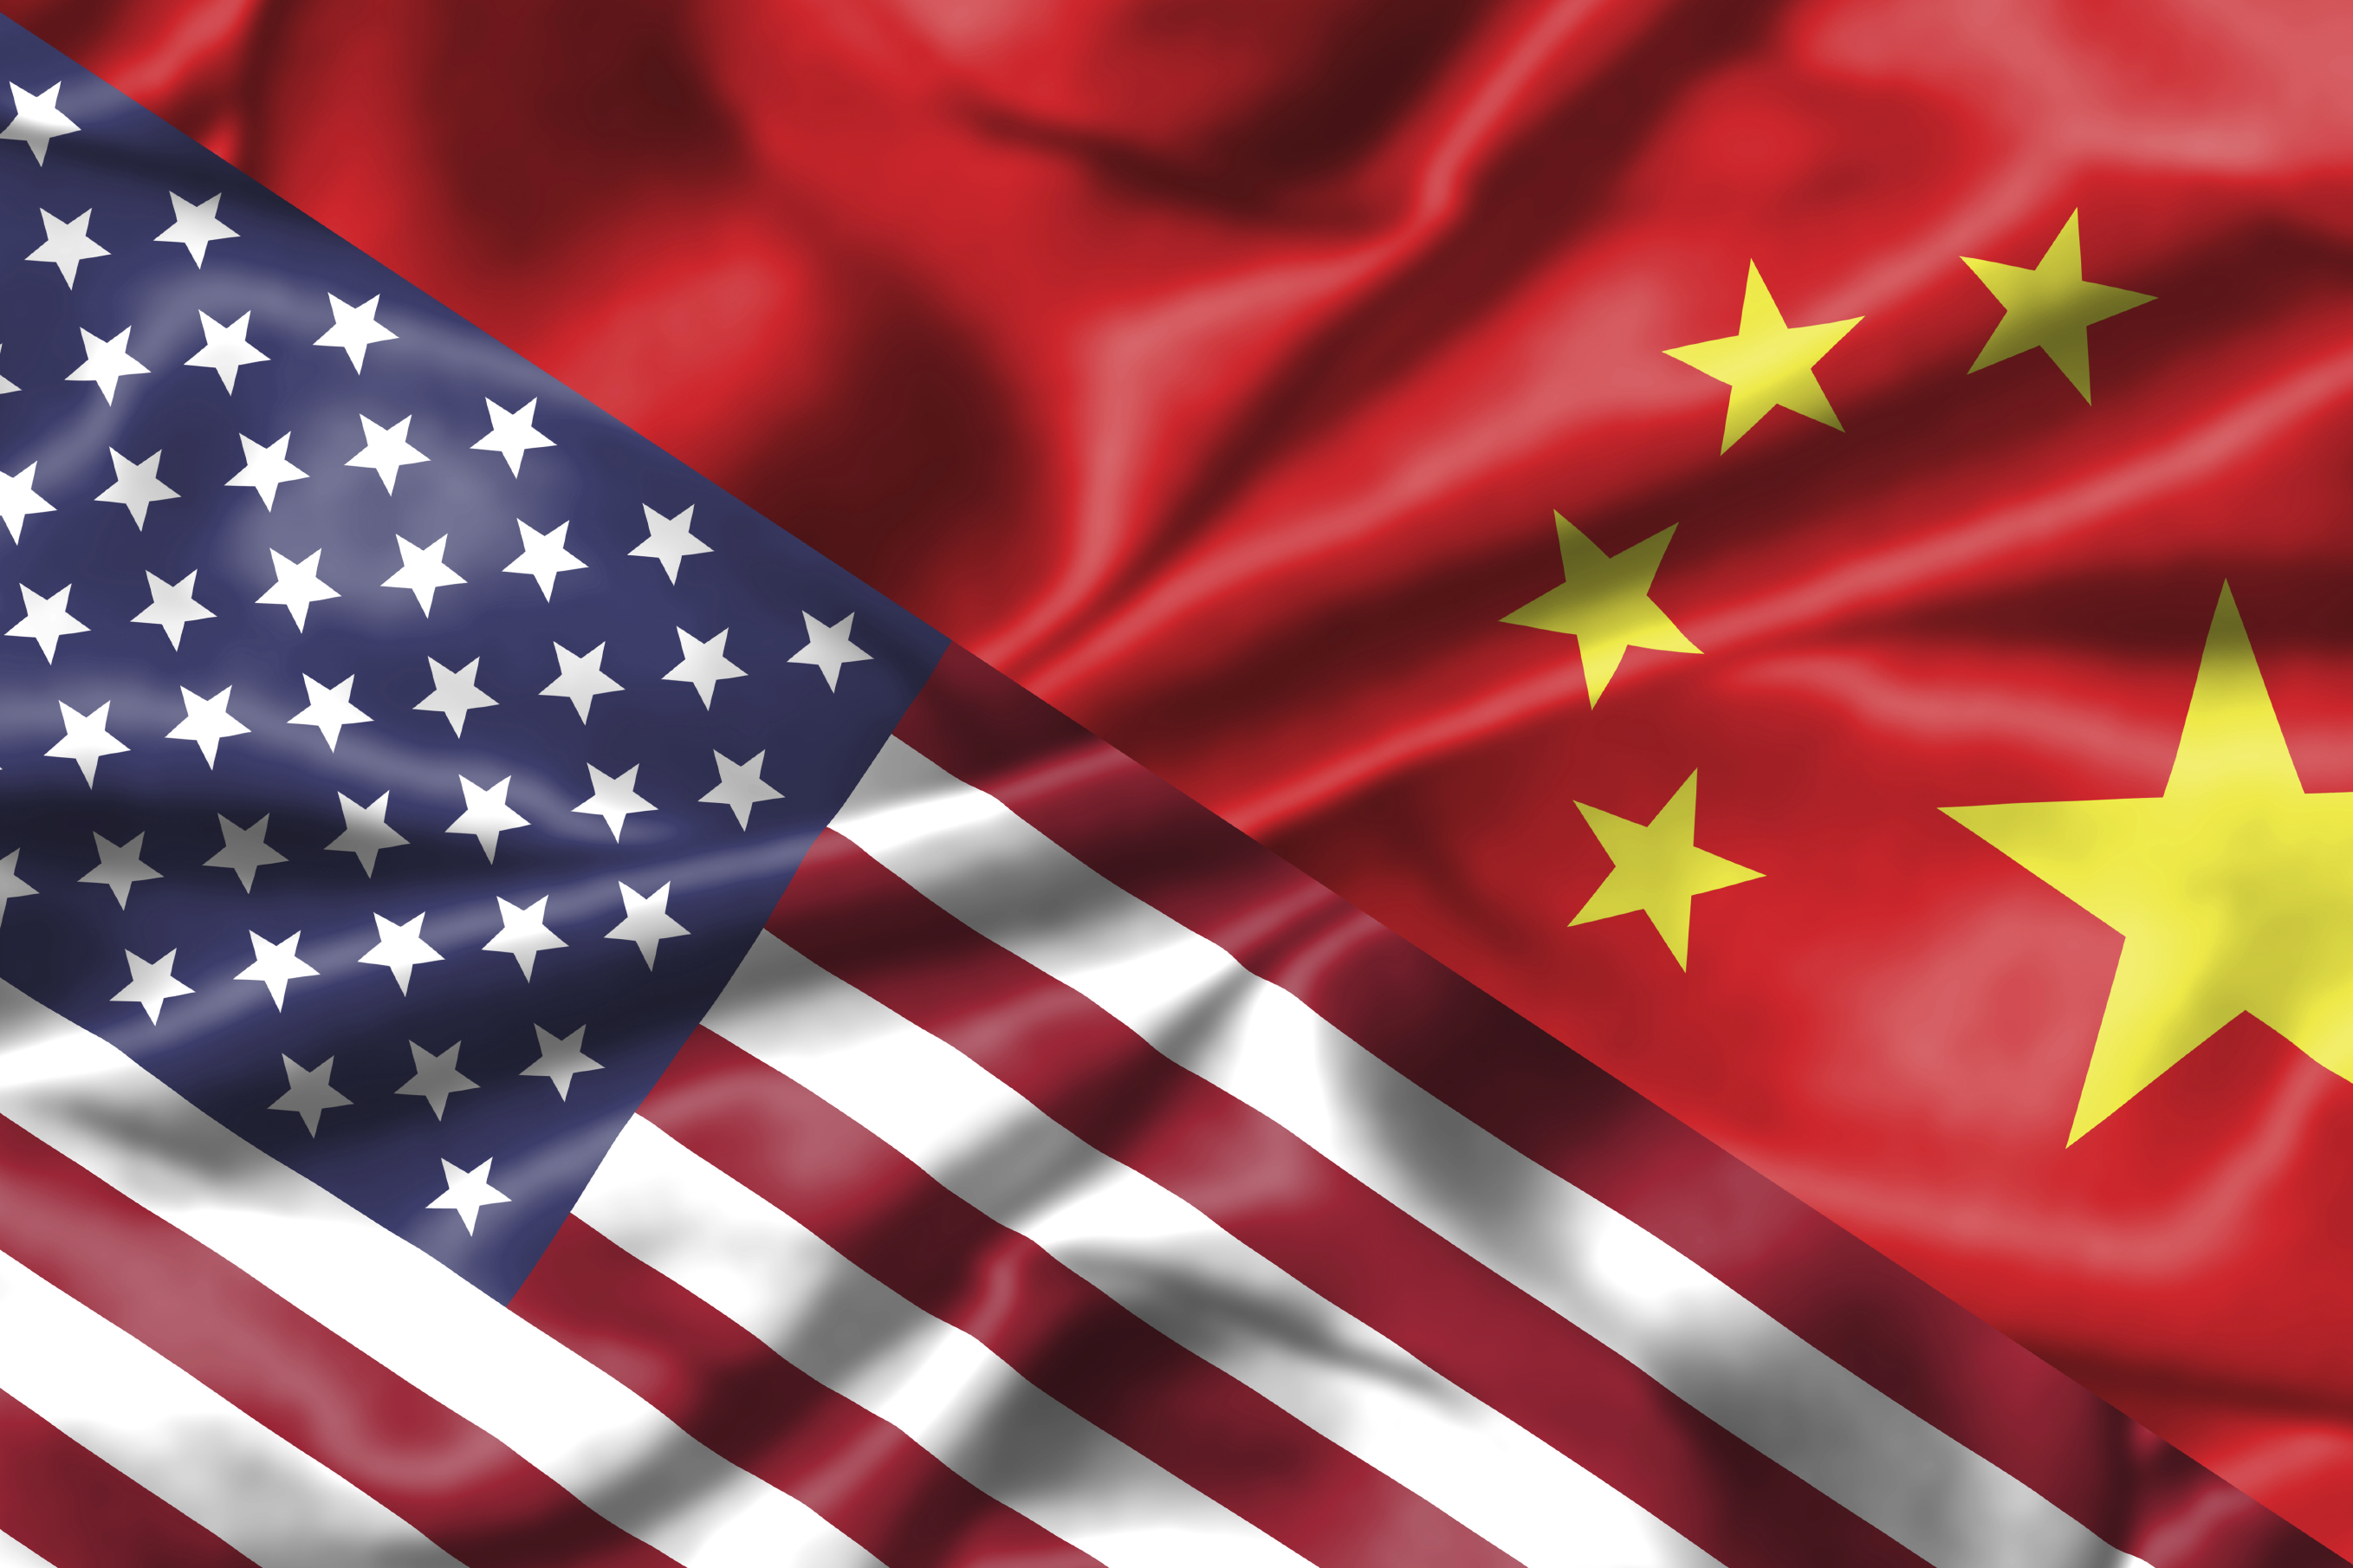 China and the United States: Who will slay its dragon first?